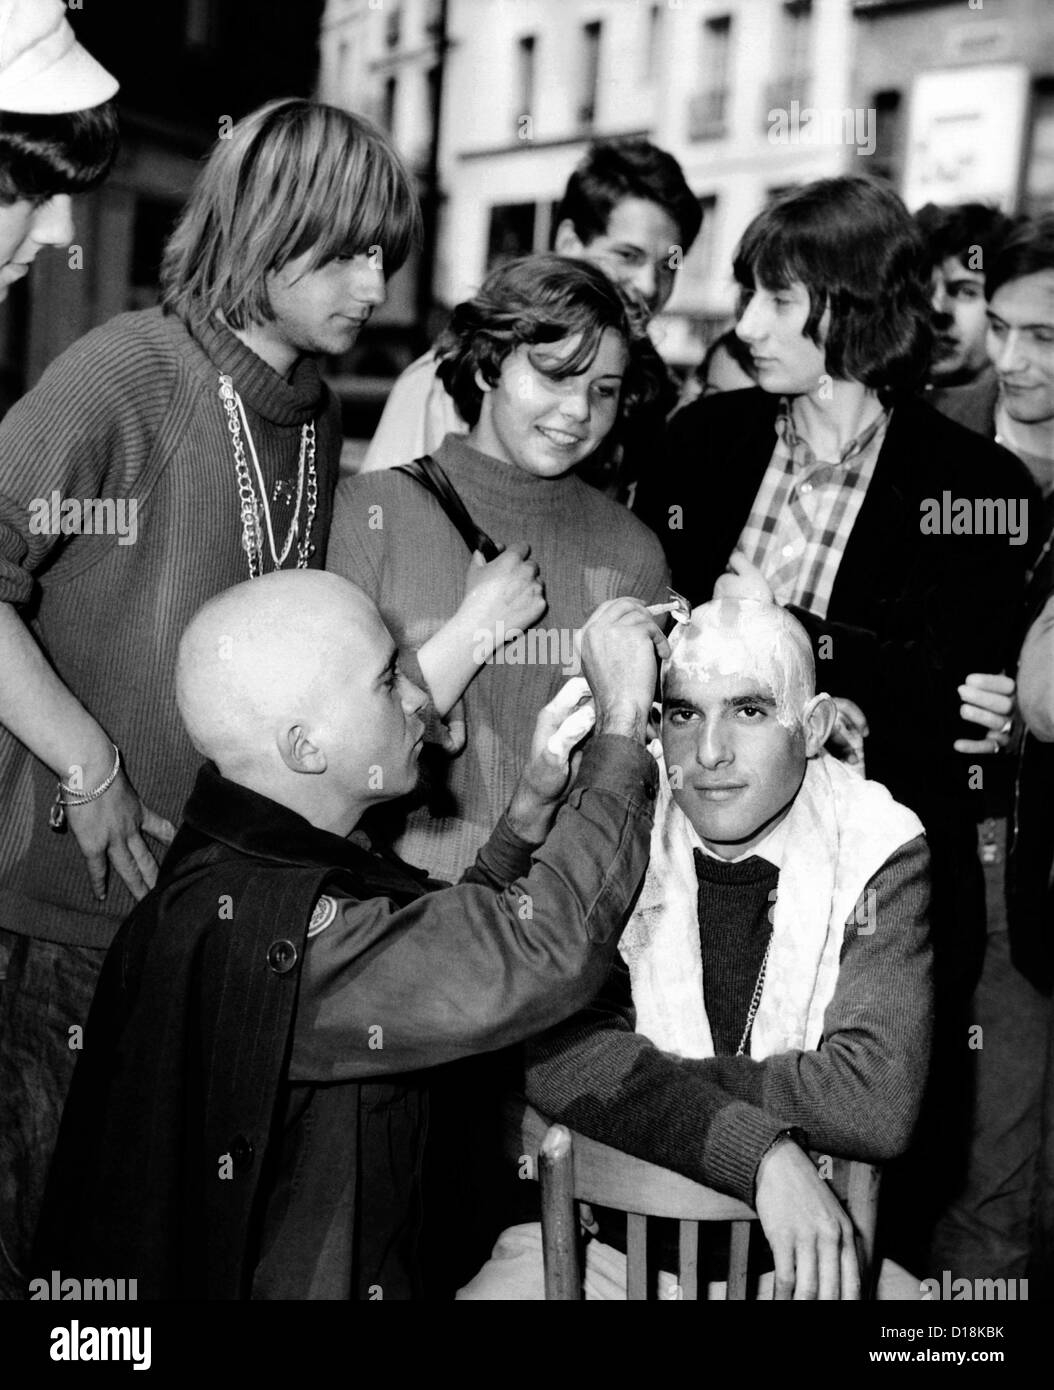 New hair fashions for the Parisian counterculture. Some 'beatniks' are trading in their long hair for shaved heads. July 30, Stock Photo